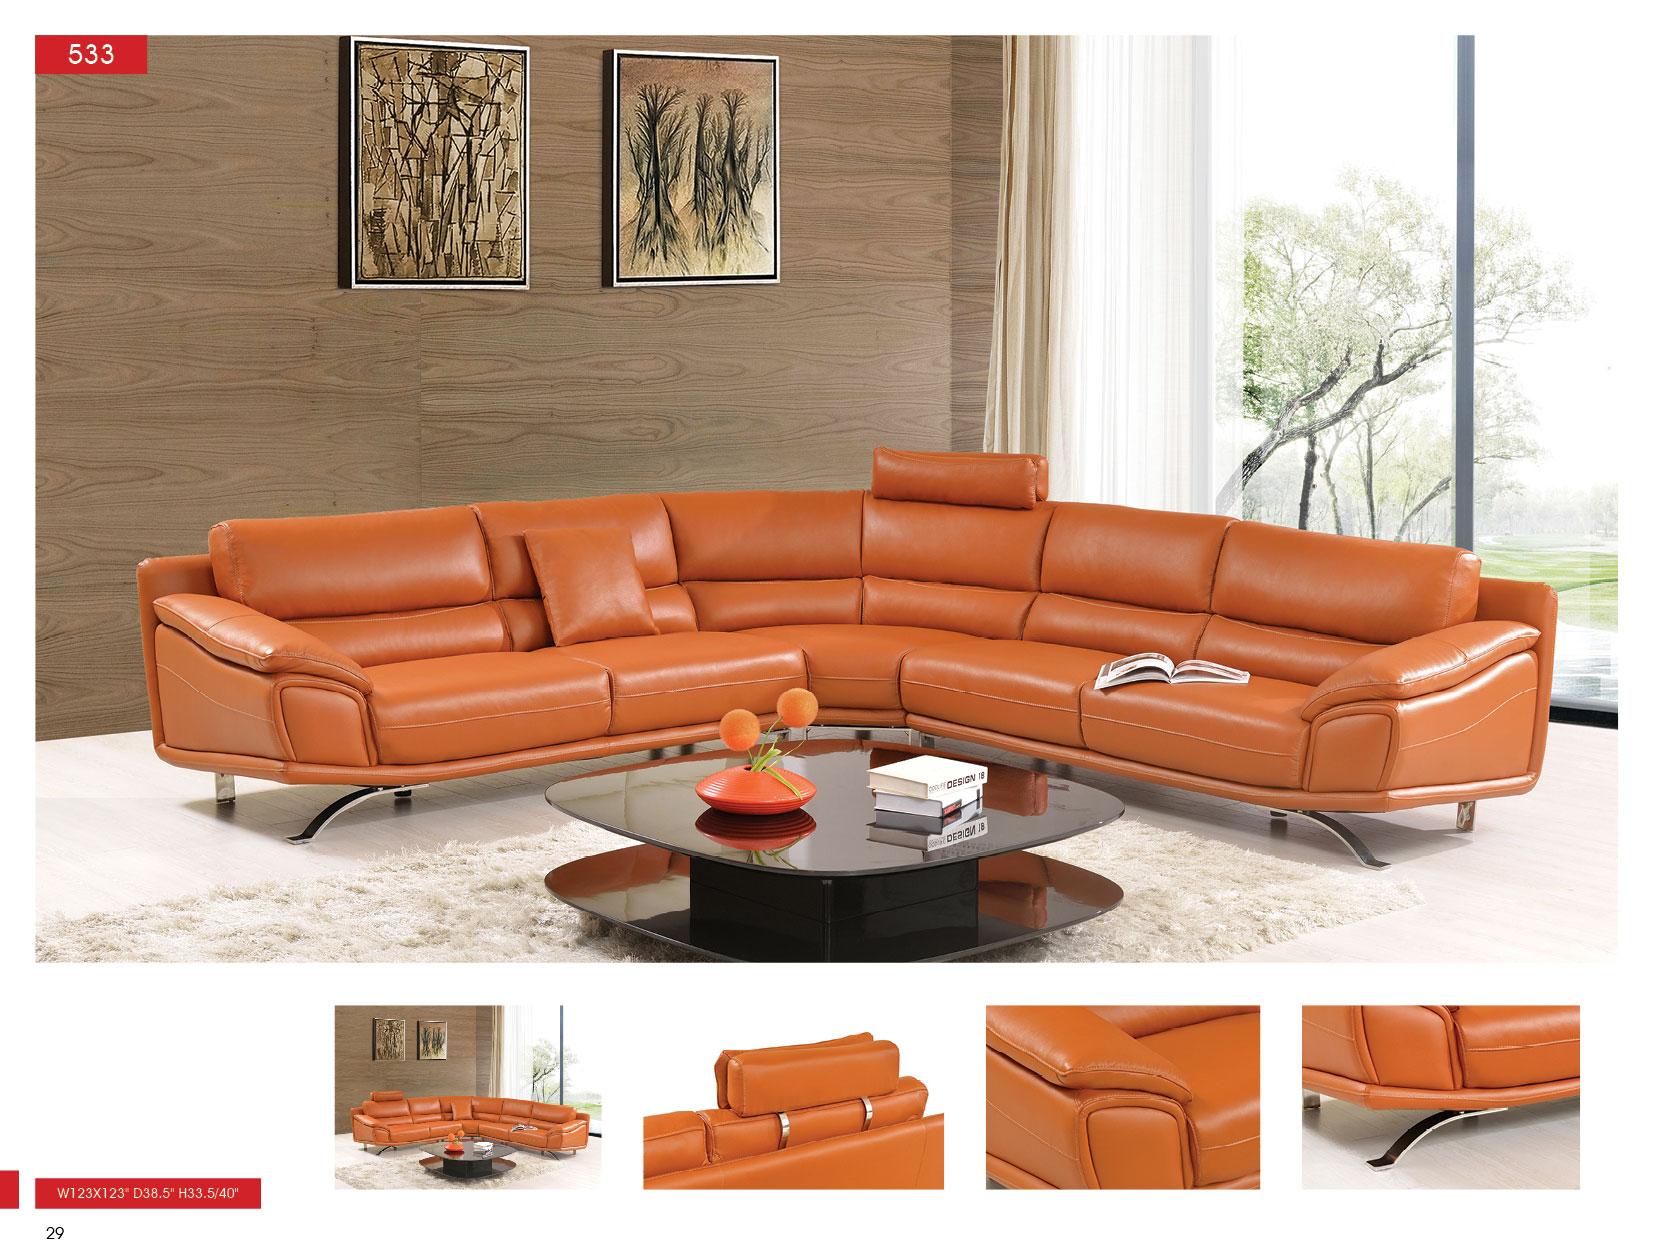 Contemporary Sectional Sofa 533 533SECTIONAL in Orange Leather